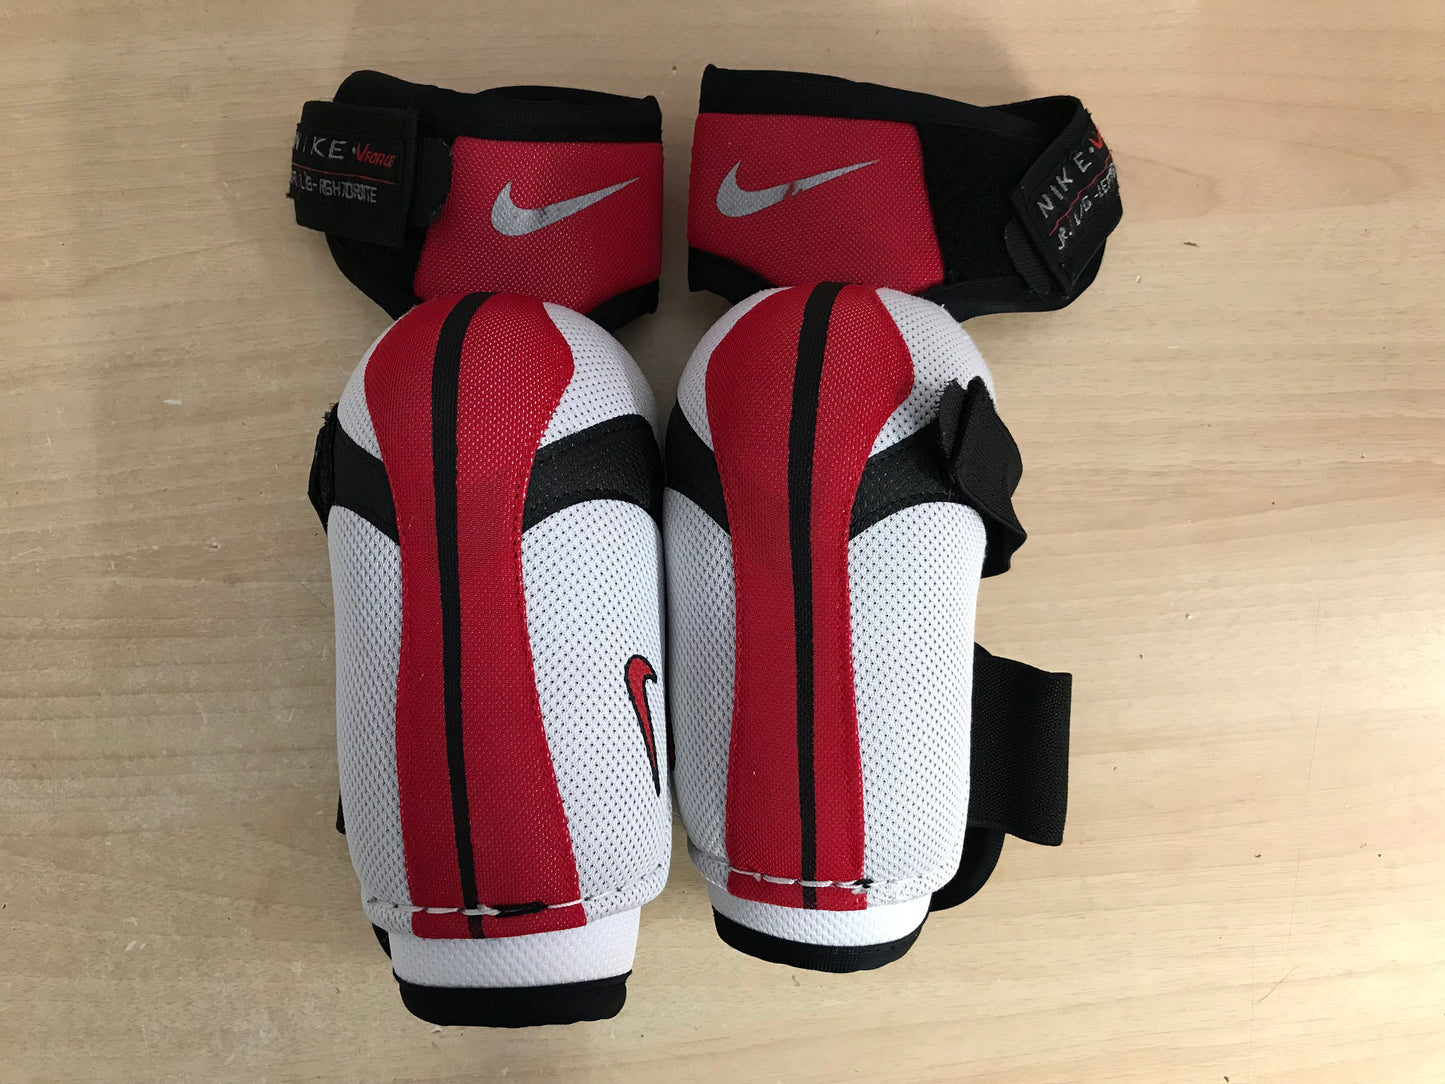 Hockey Elbow Pads Child Size Junior Large Nike Black White Red Excellent